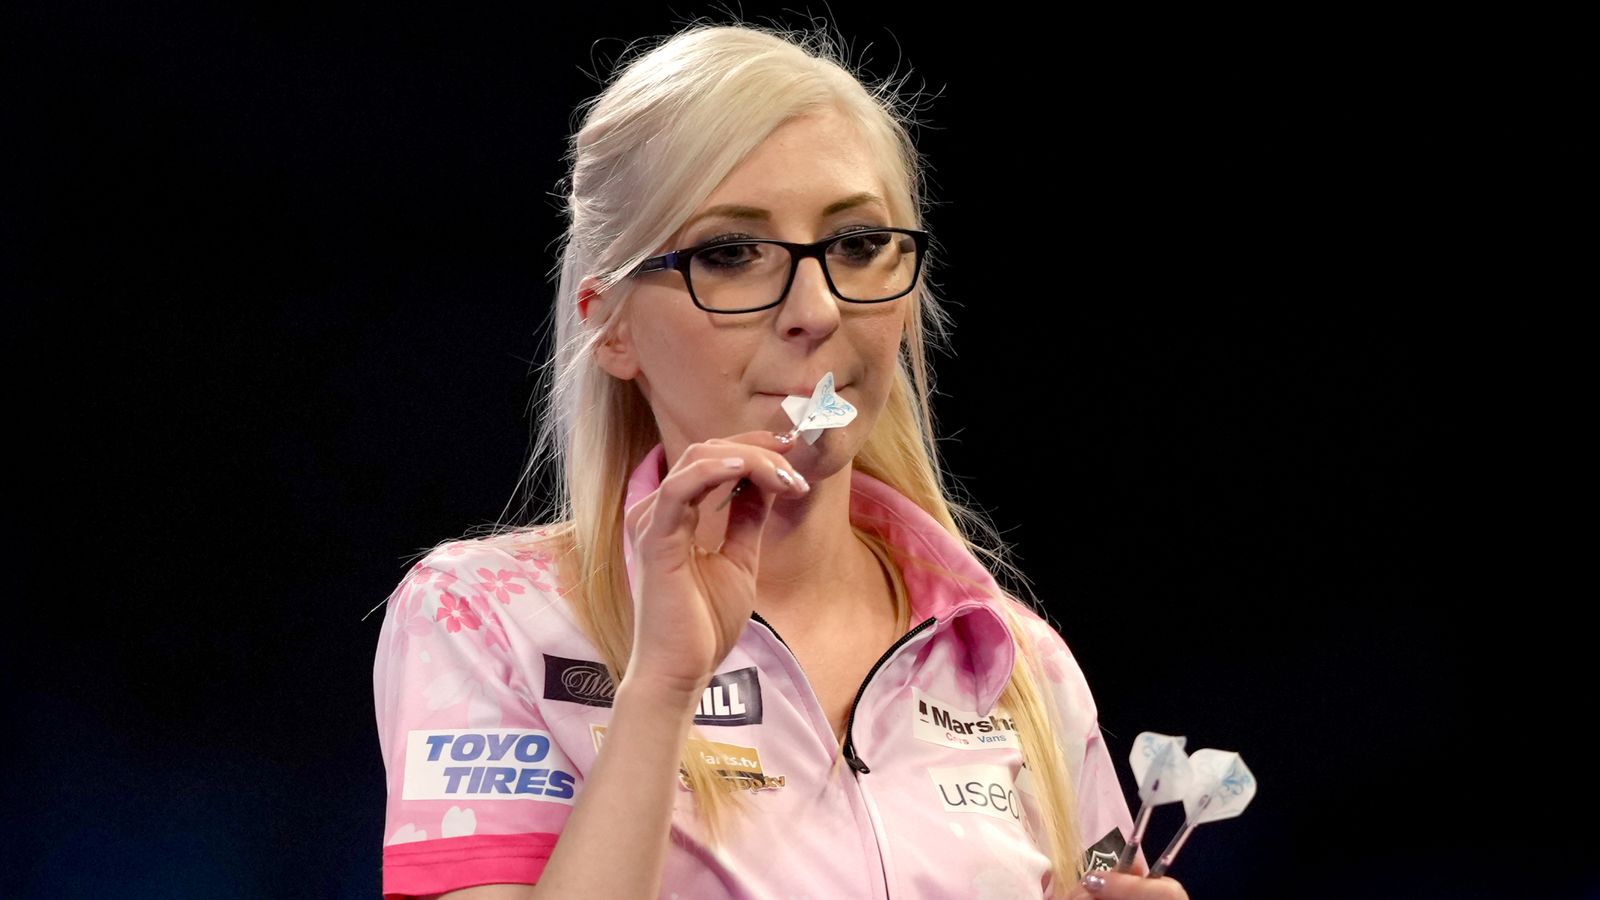 PDC to expand Women's Series to 24 events in 2023; Women's World Matchplay will be staged again